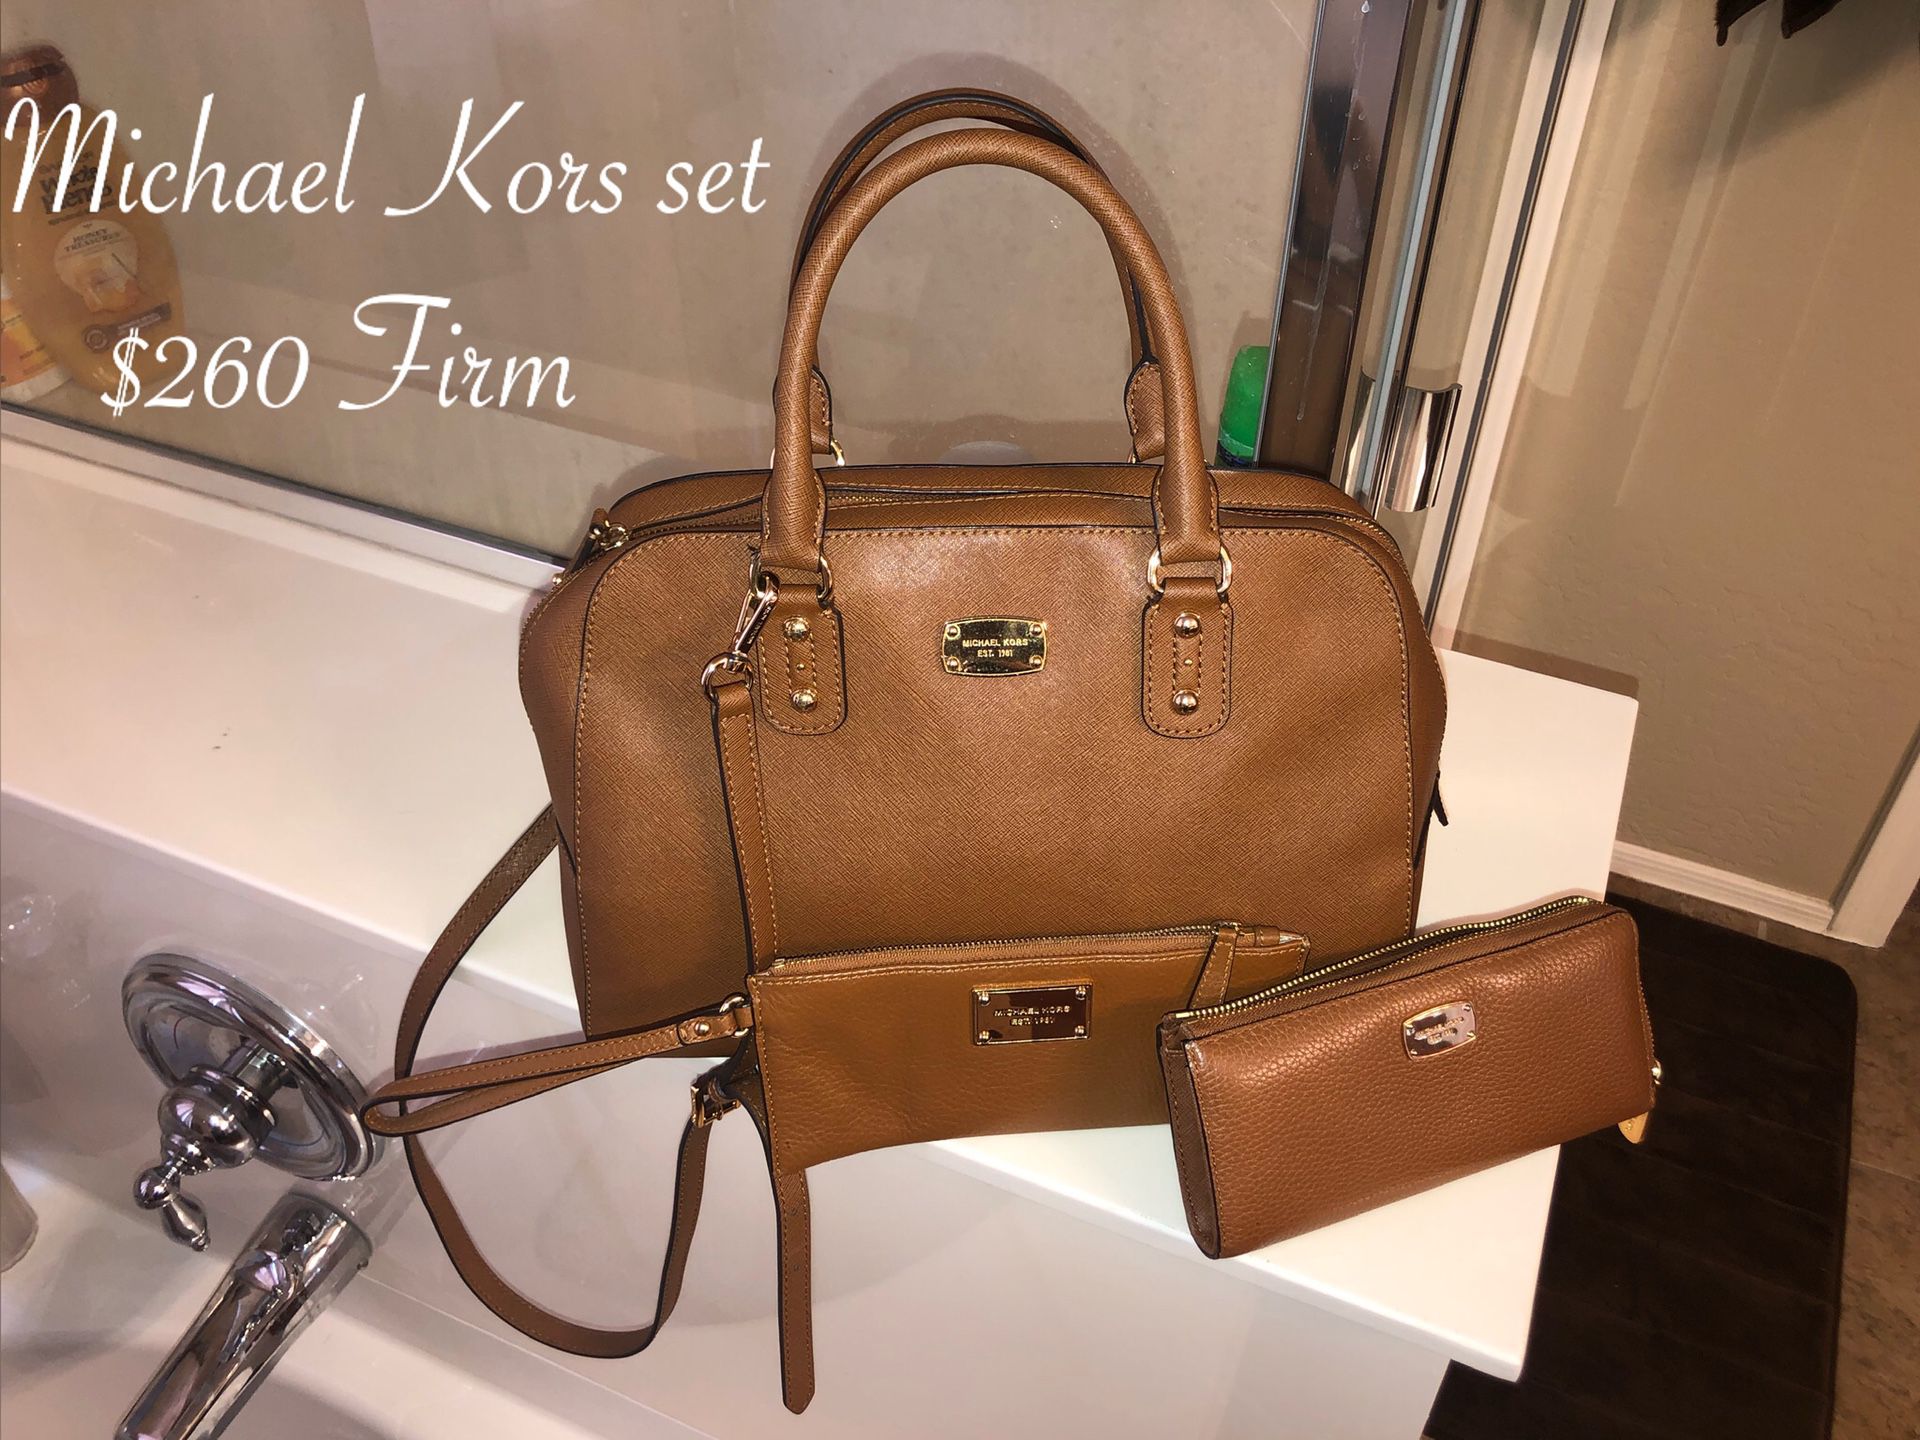 Like new Michael Kors set selling as a set only $260 firm